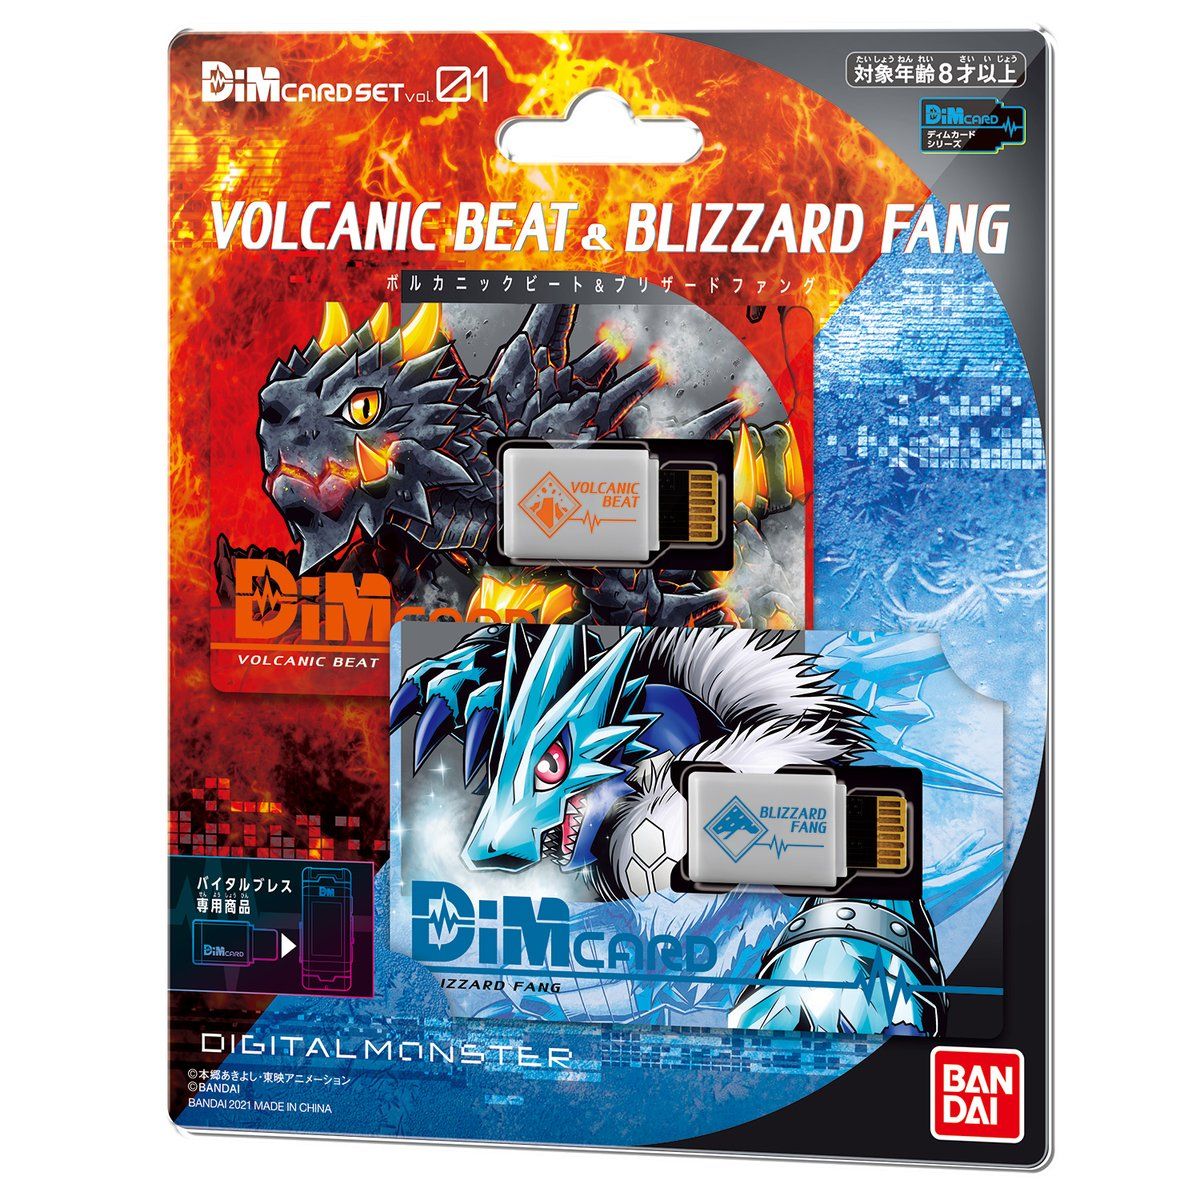 Dimカードセットvol.01 VOLCANIC BEAT＆BLIZZARDFANG